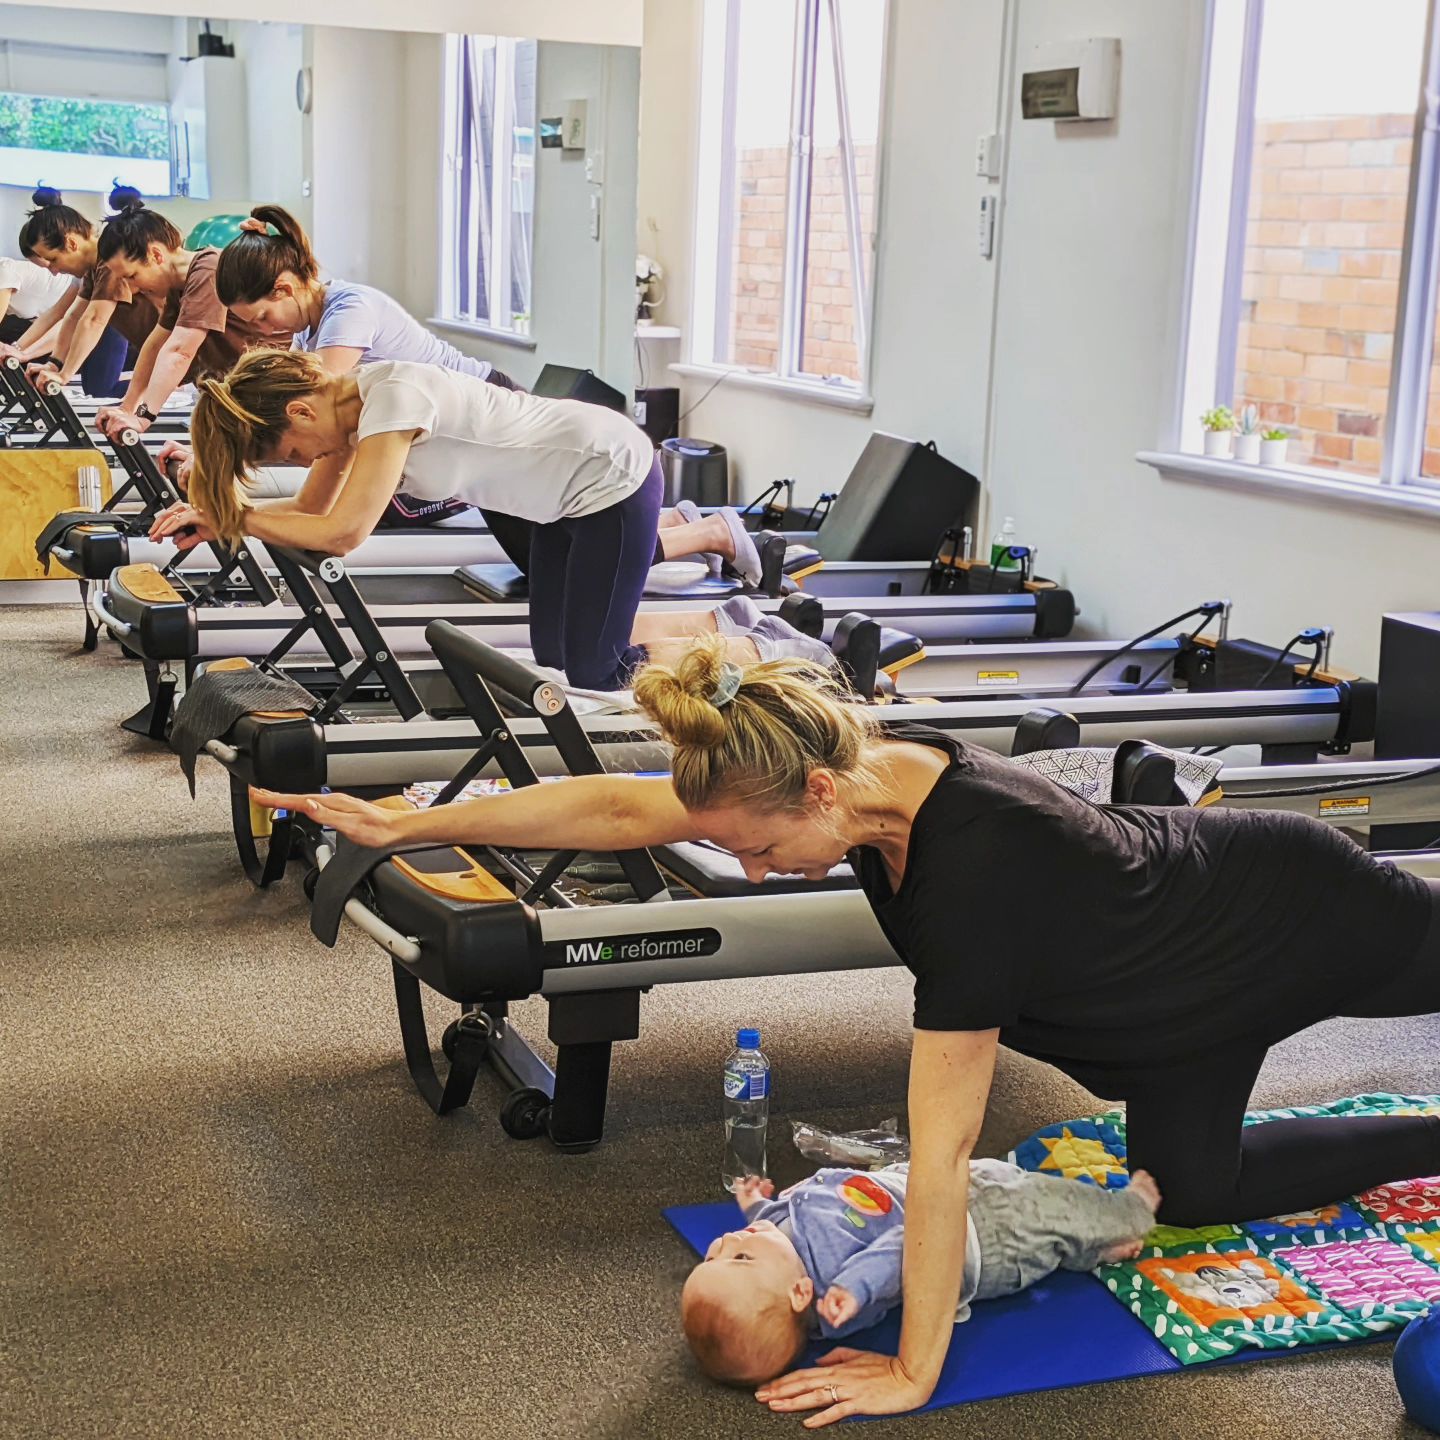 Great session with our Mums & Bubs combination reformer/ mat group